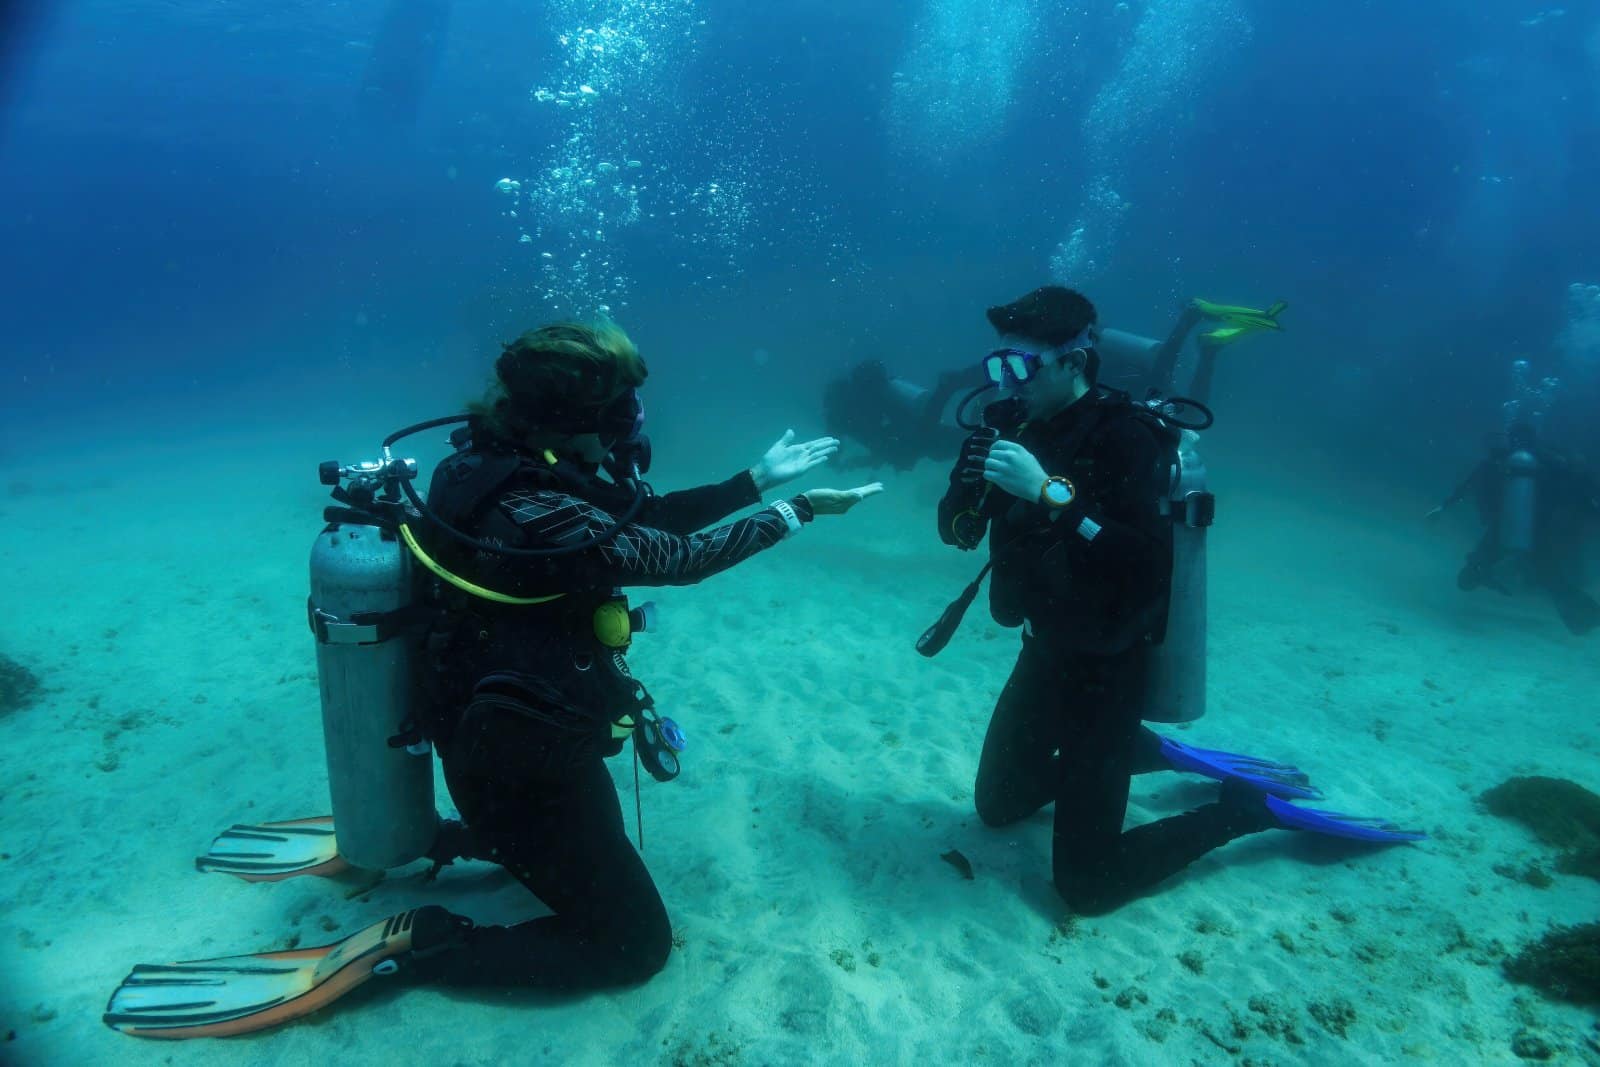 <p class="wp-caption-text">Image Credit: Shutterstock / AlexDreamliner</p>  <p><span>After completing the PADI Open Water Diver course, divers are often eager to expand their skills and explore more specialized aspects of diving. Further diving courses offer the opportunity to enhance your underwater proficiency, safety, and enjoyment. Here’s an overview of some of the key courses available for divers looking to advance beyond the basics.</span></p>